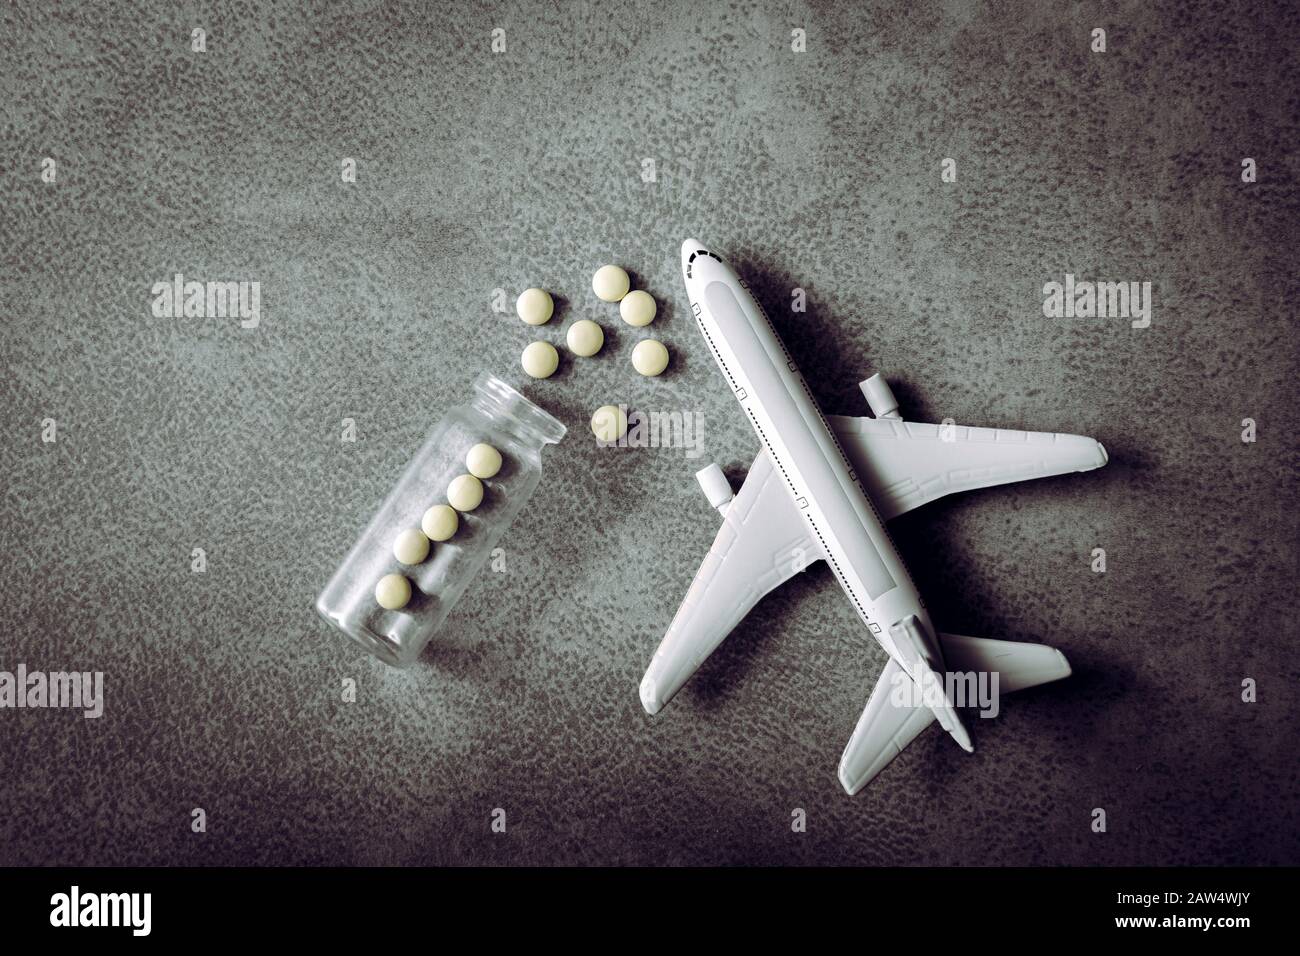 Plane figurine with pills spilled. Travel and medicine concept. Flat lay view with copy space on minimalist gray background. Stock Photo